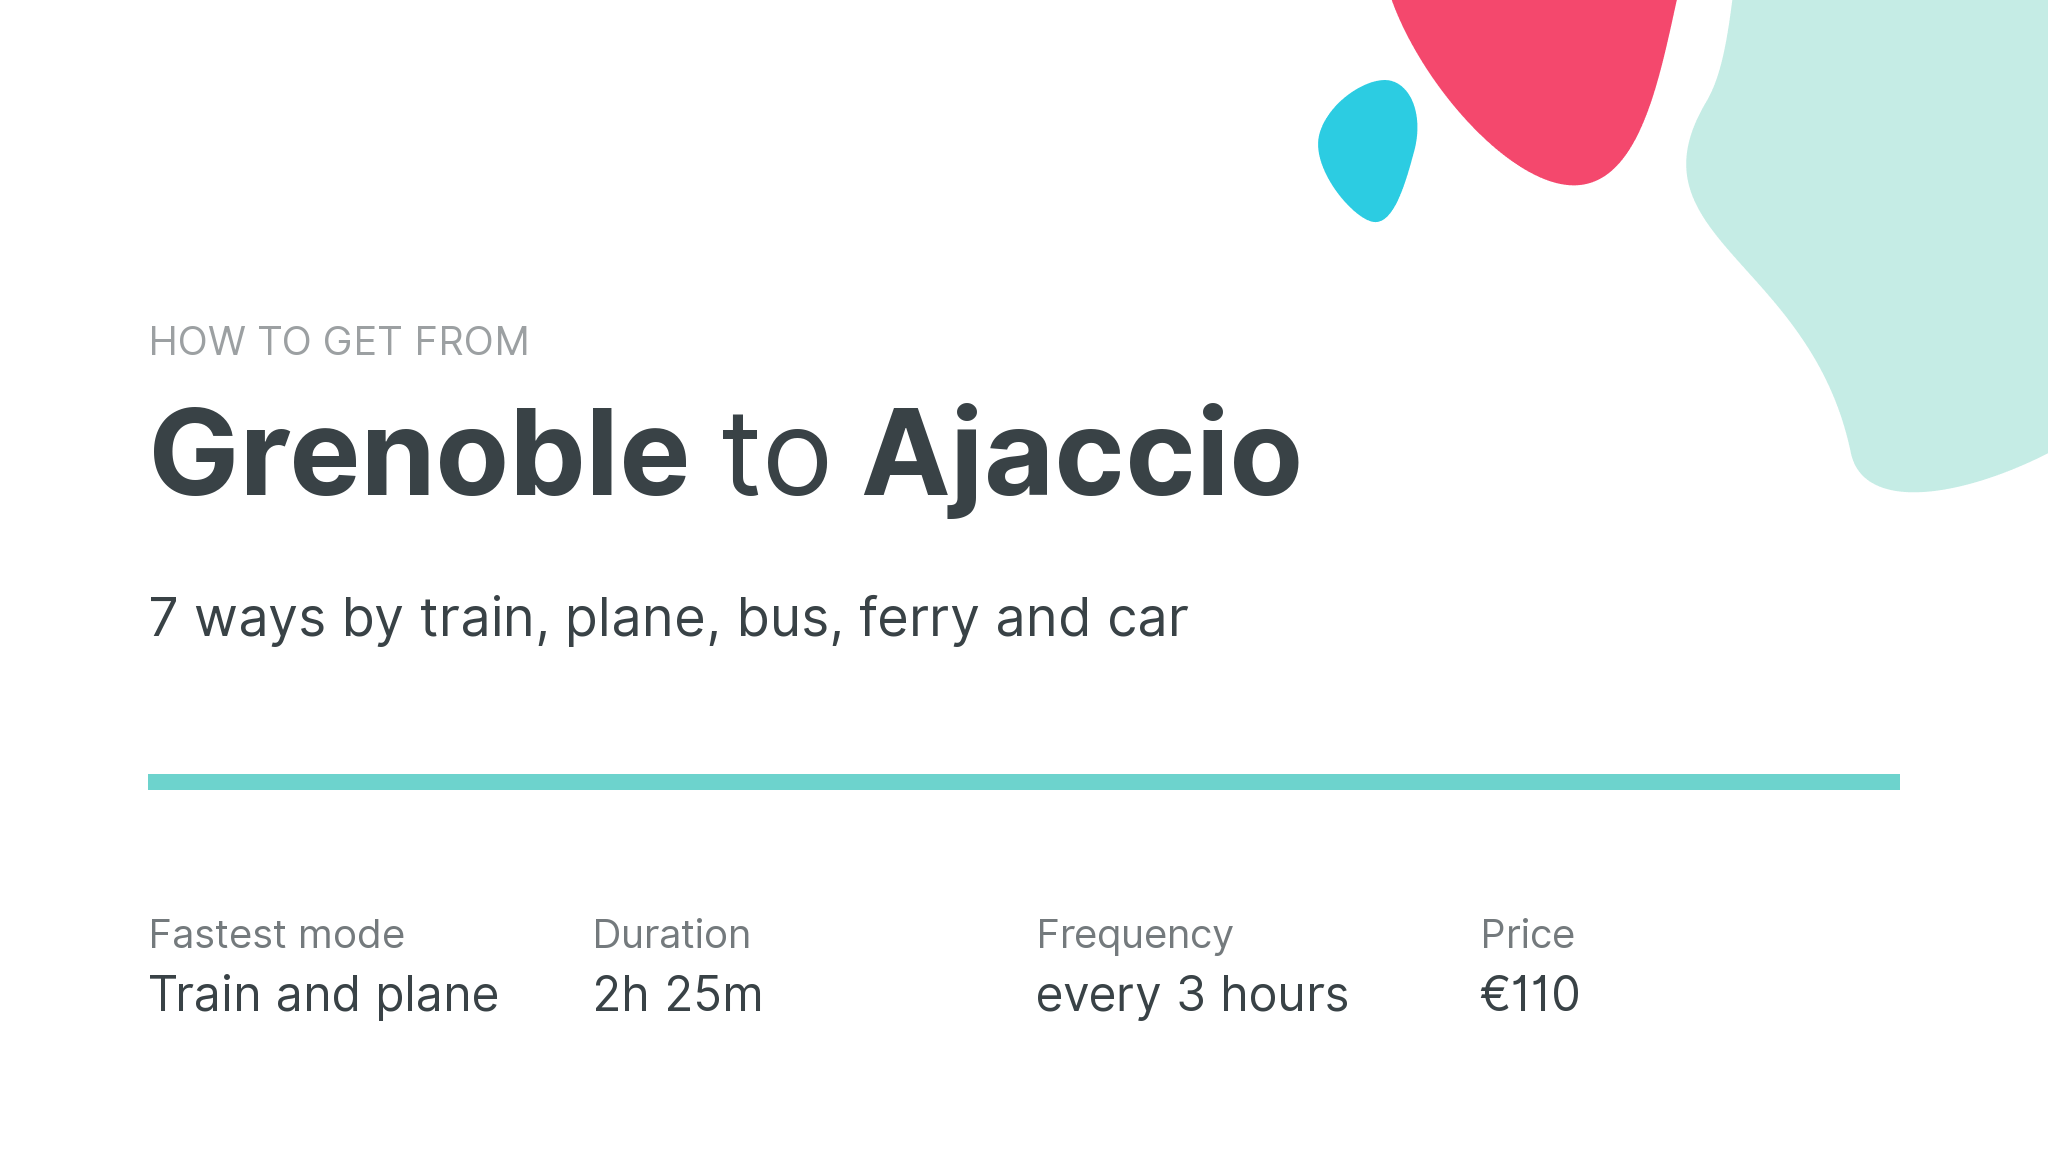 How do I get from Grenoble to Ajaccio